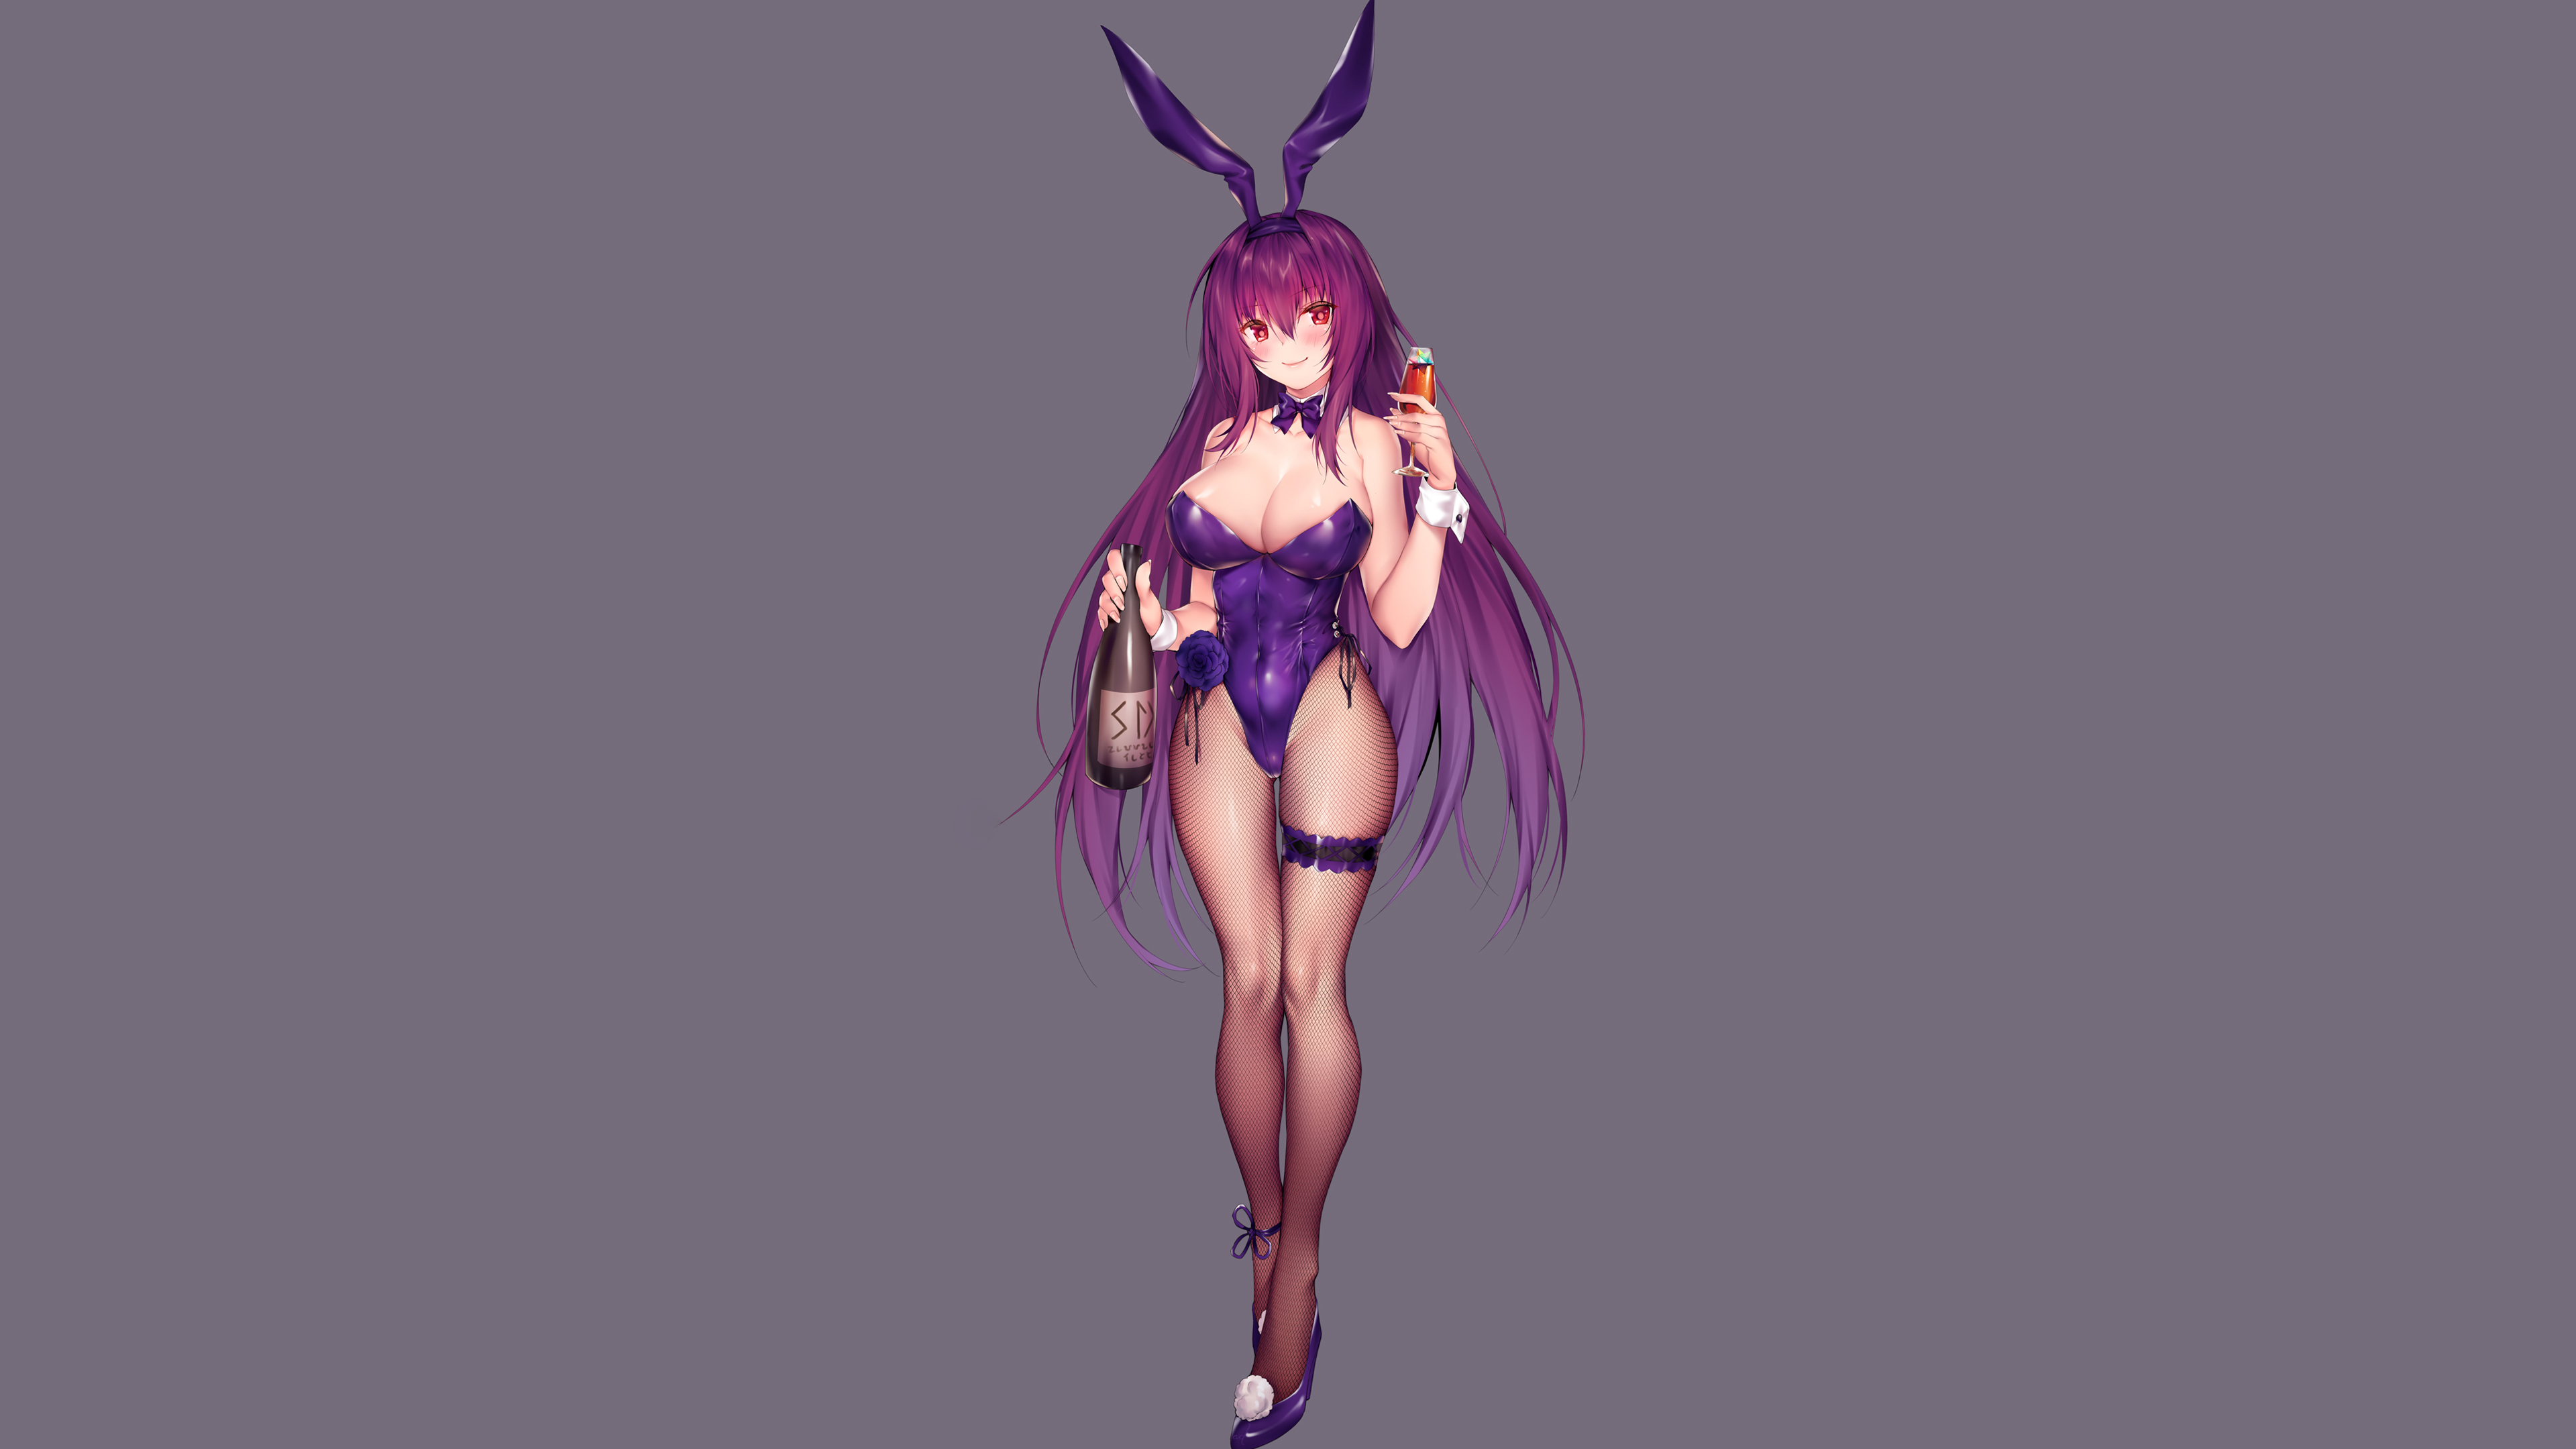 Anime 3840x2160 Fate series anime girls Scathach illustration digital art simple background